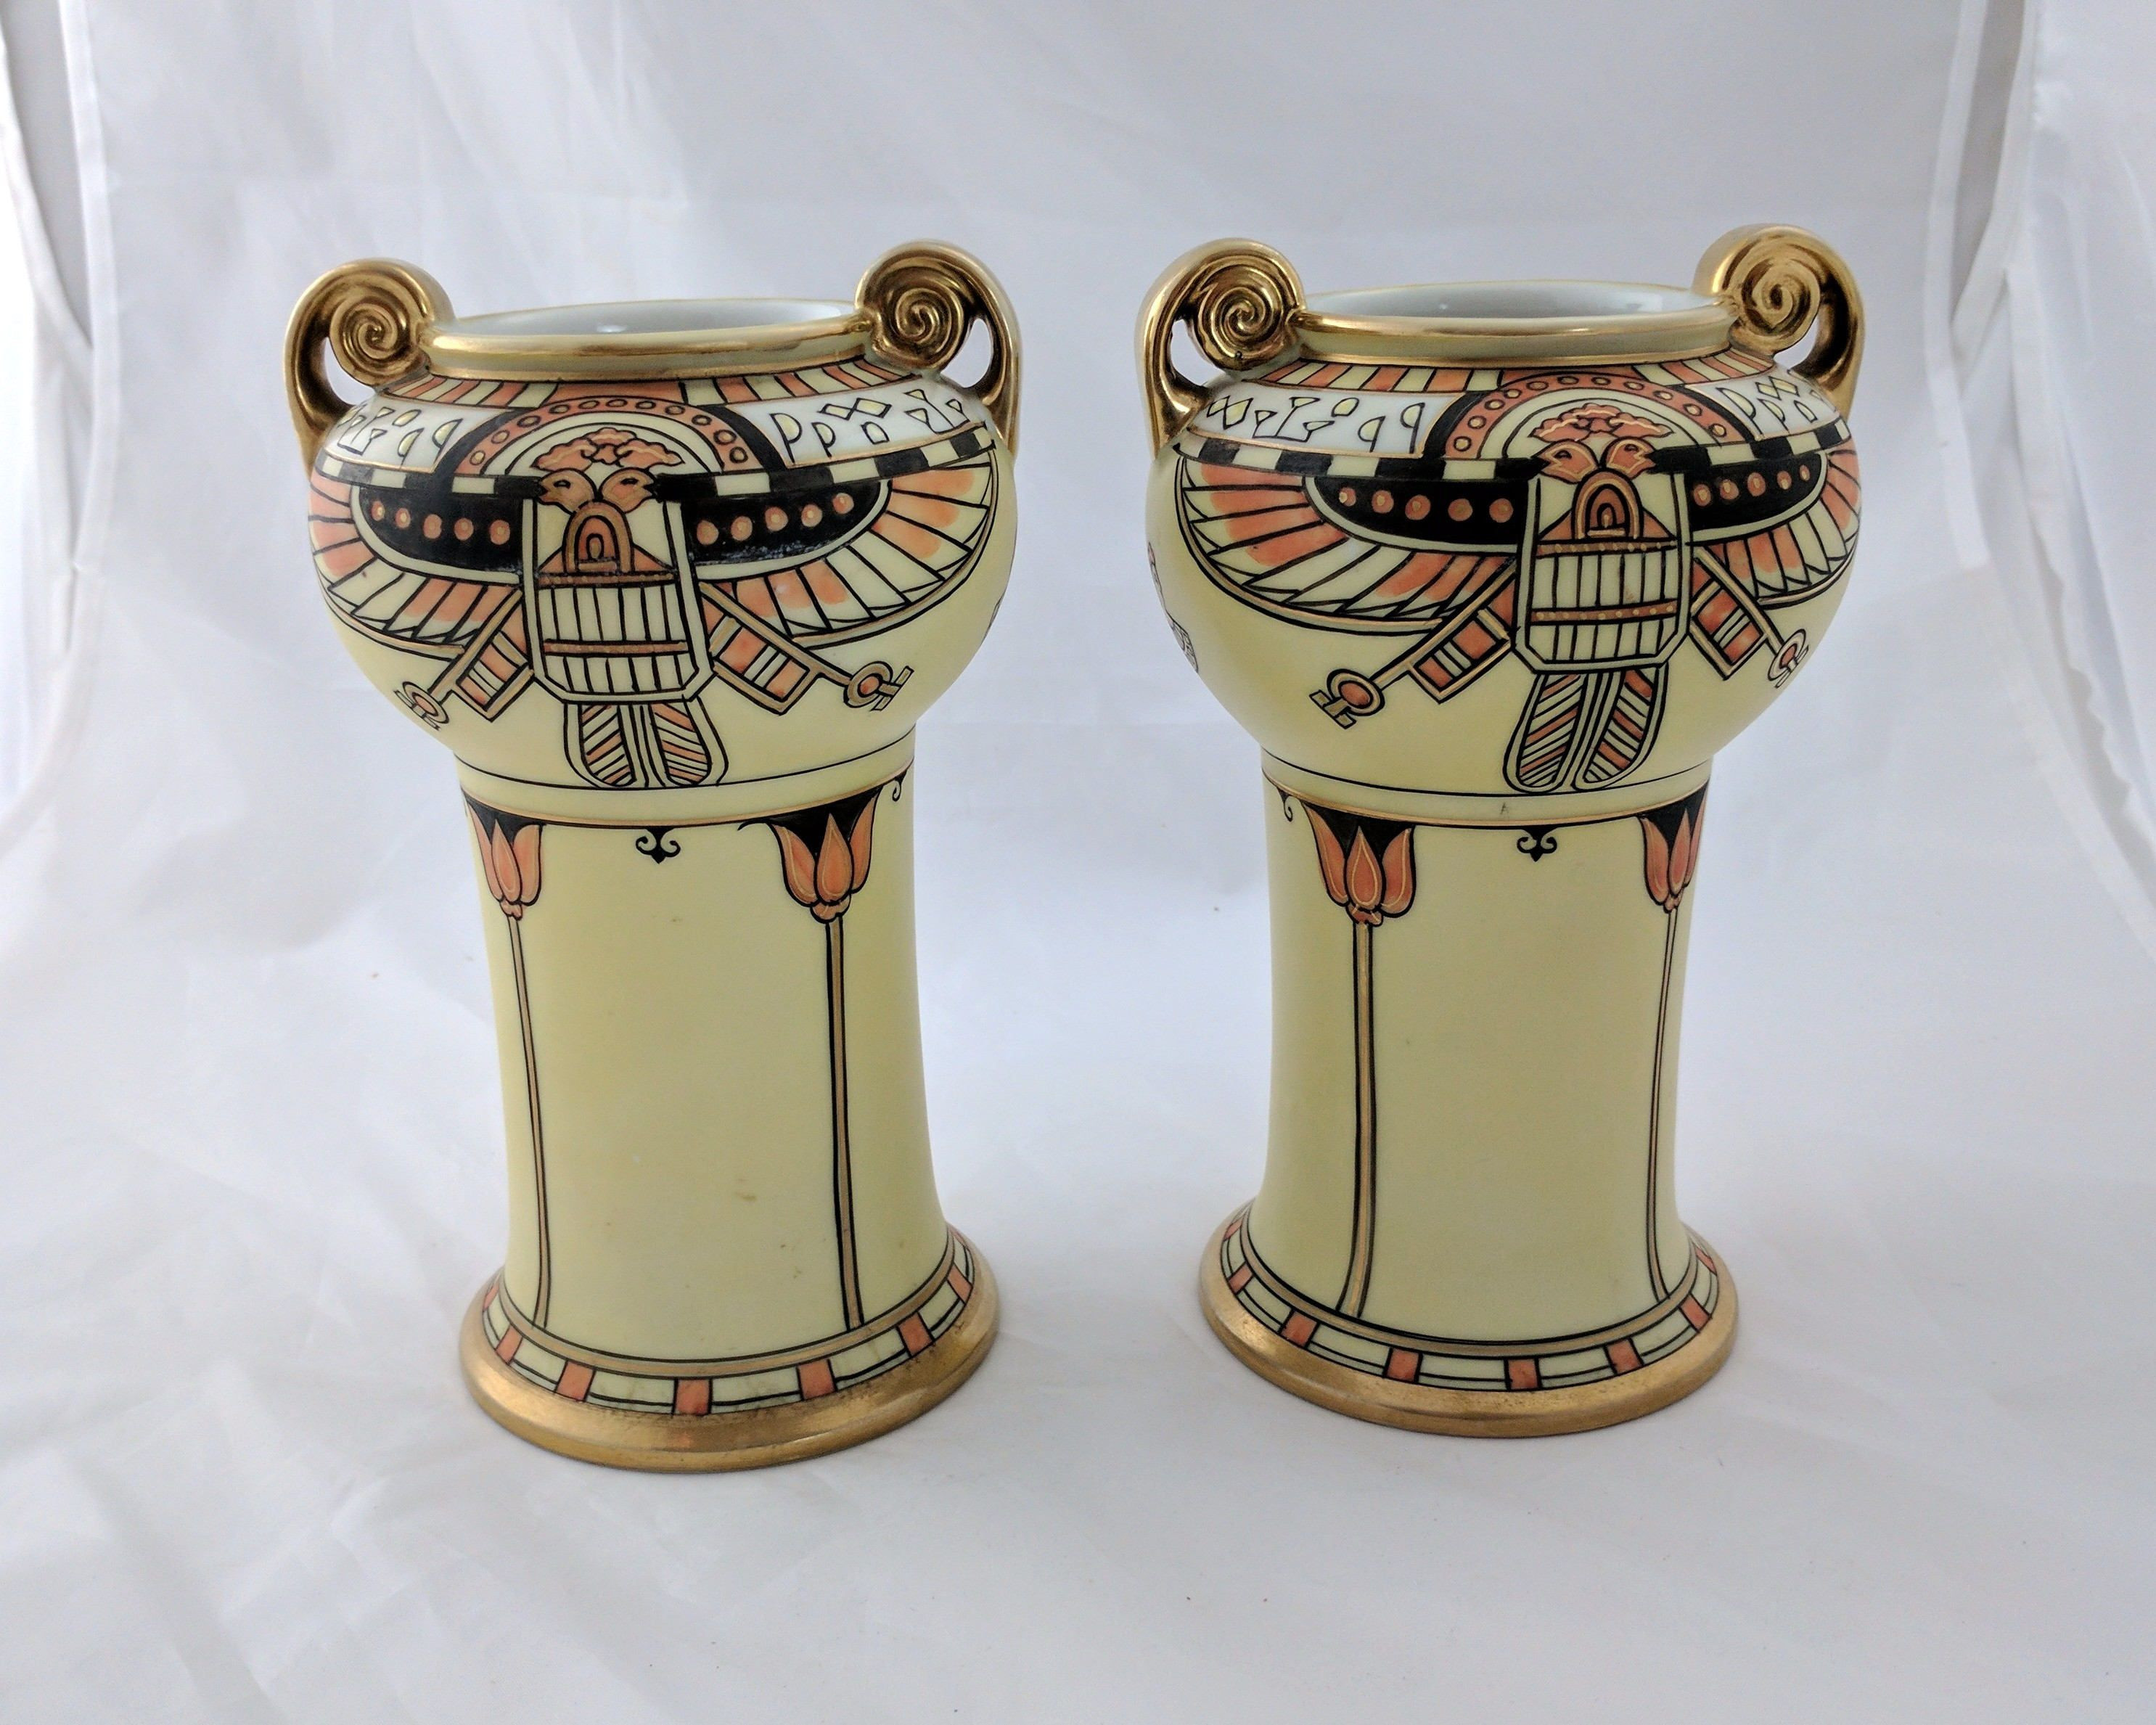 satsuma vase value of pair antique nippon egyptian revival porcelain vases hand painted intended for pair antique nippon egyptian revival porcelain vases hand painted 1911 21 by tlgvintageart